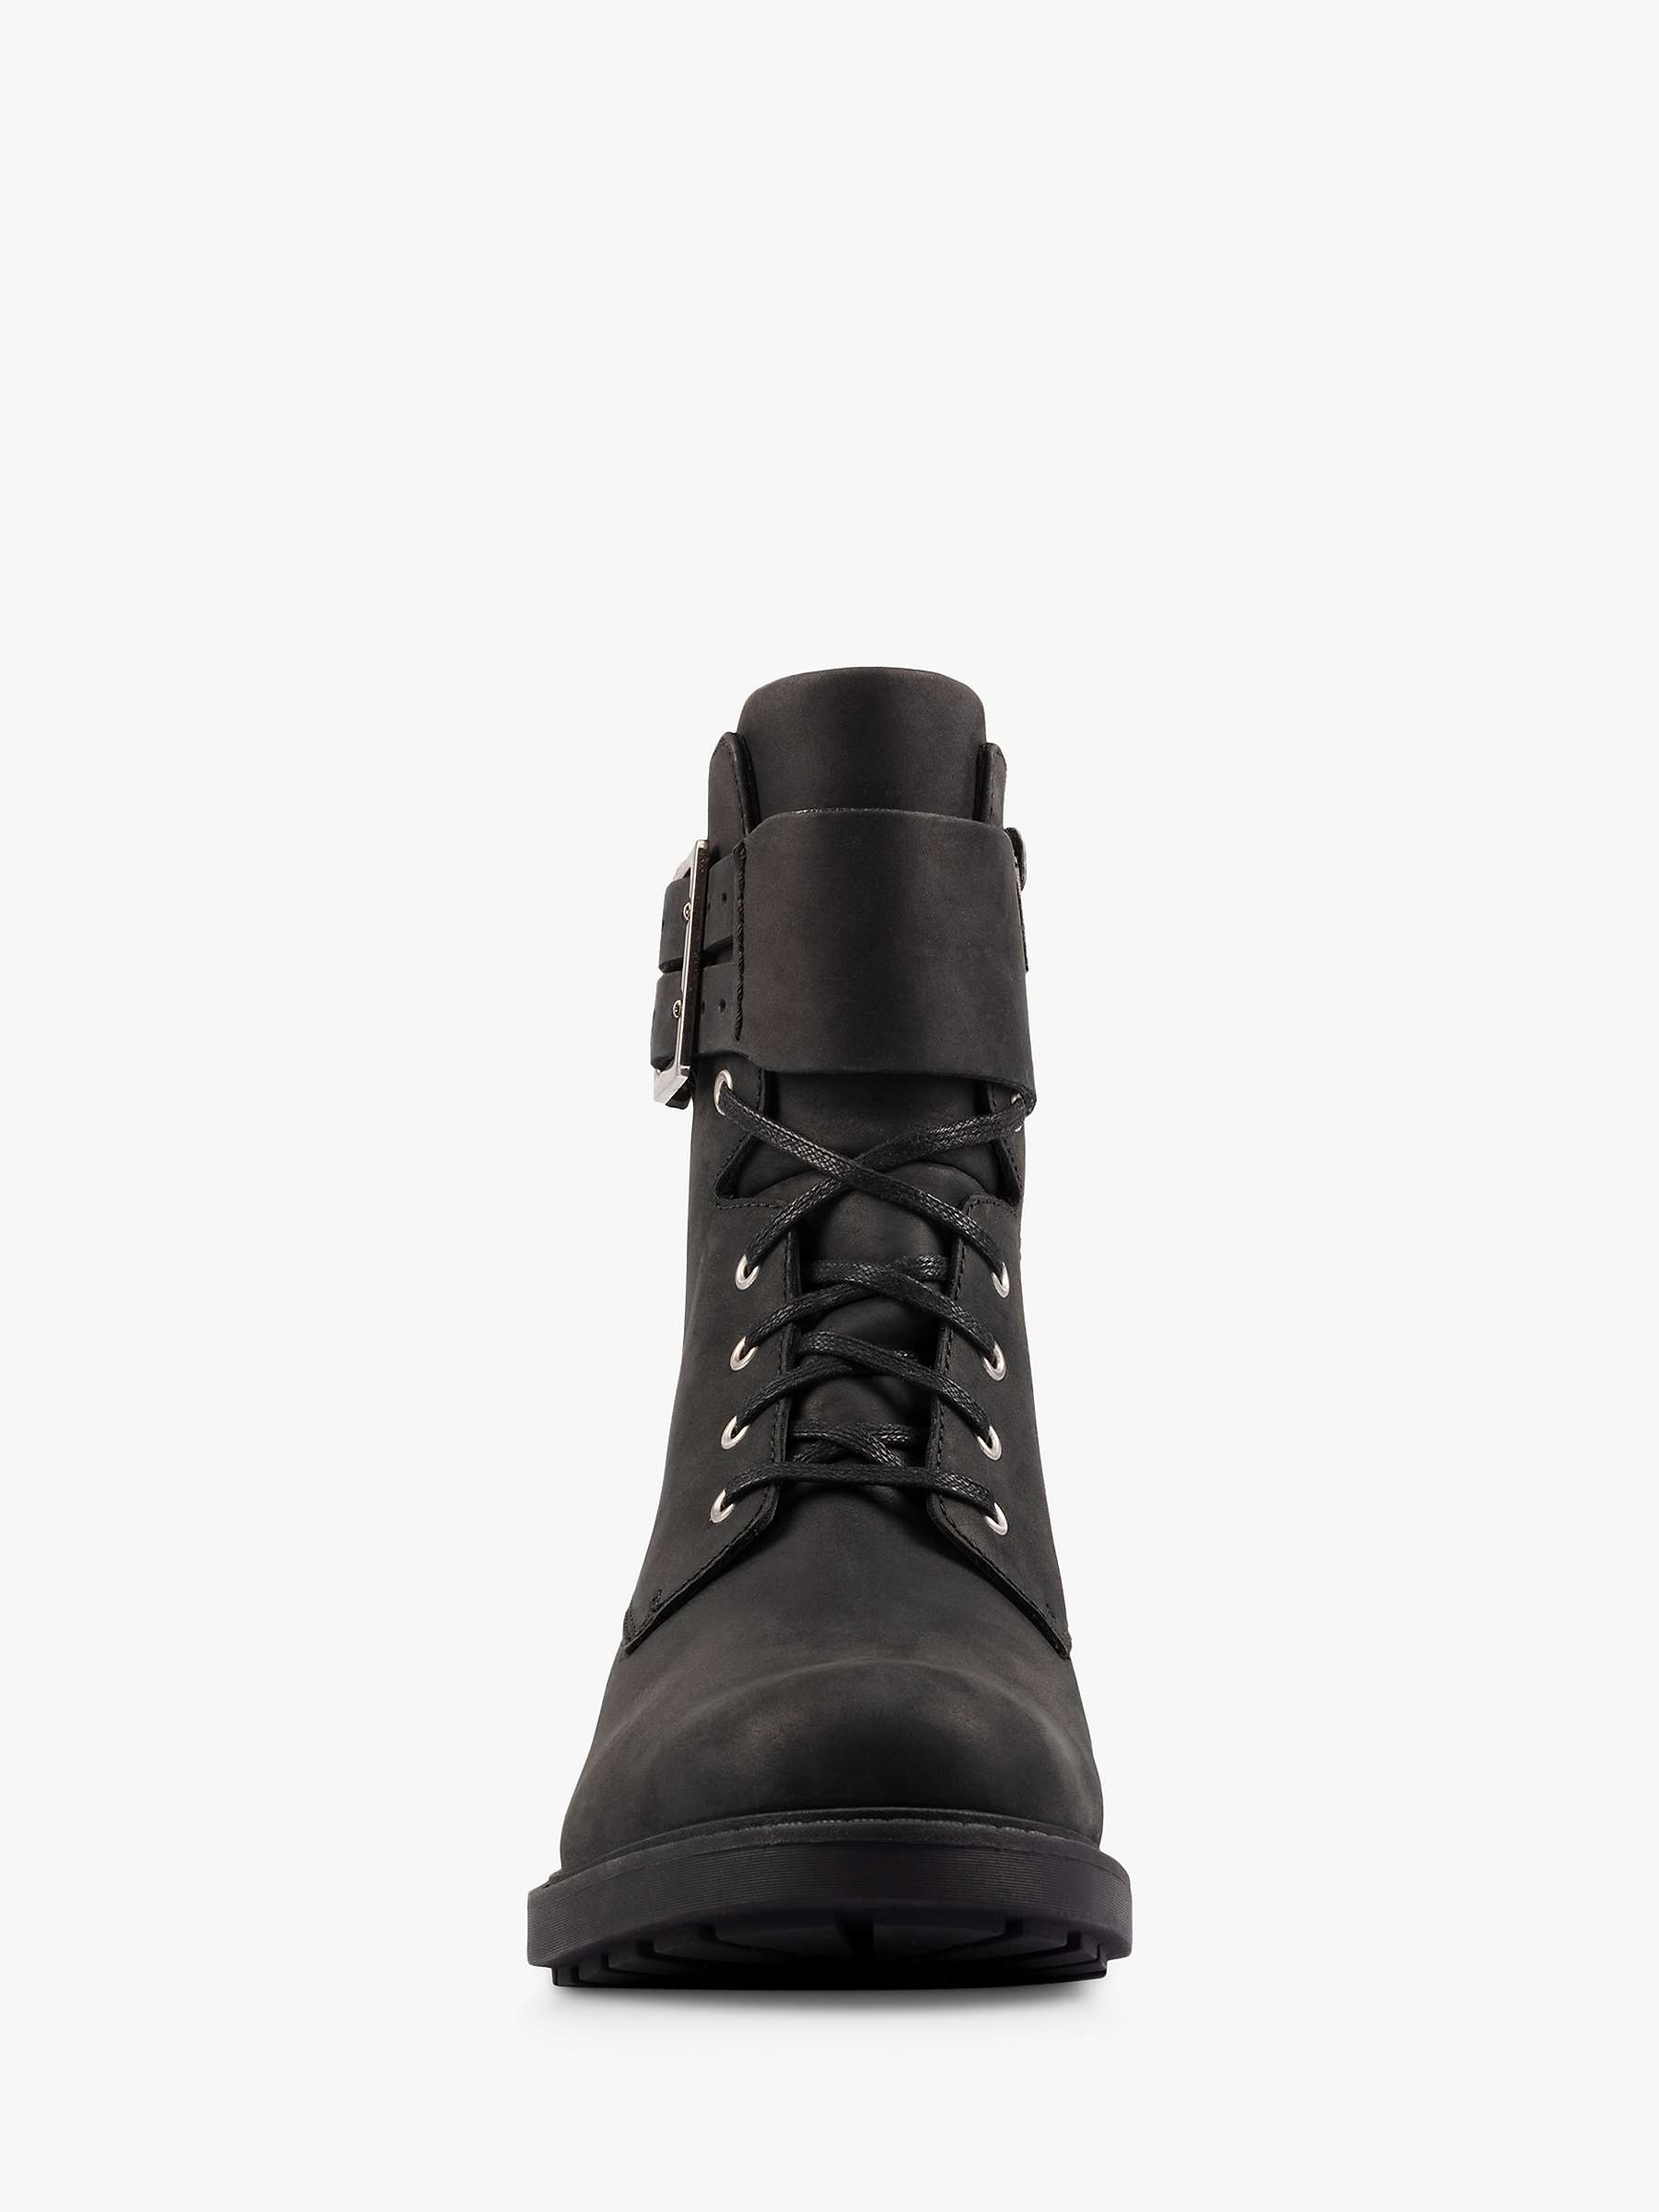 Buy Clarks Orinoco 2 Leather Wide Fit Lace Up Ankle Boots Online at johnlewis.com